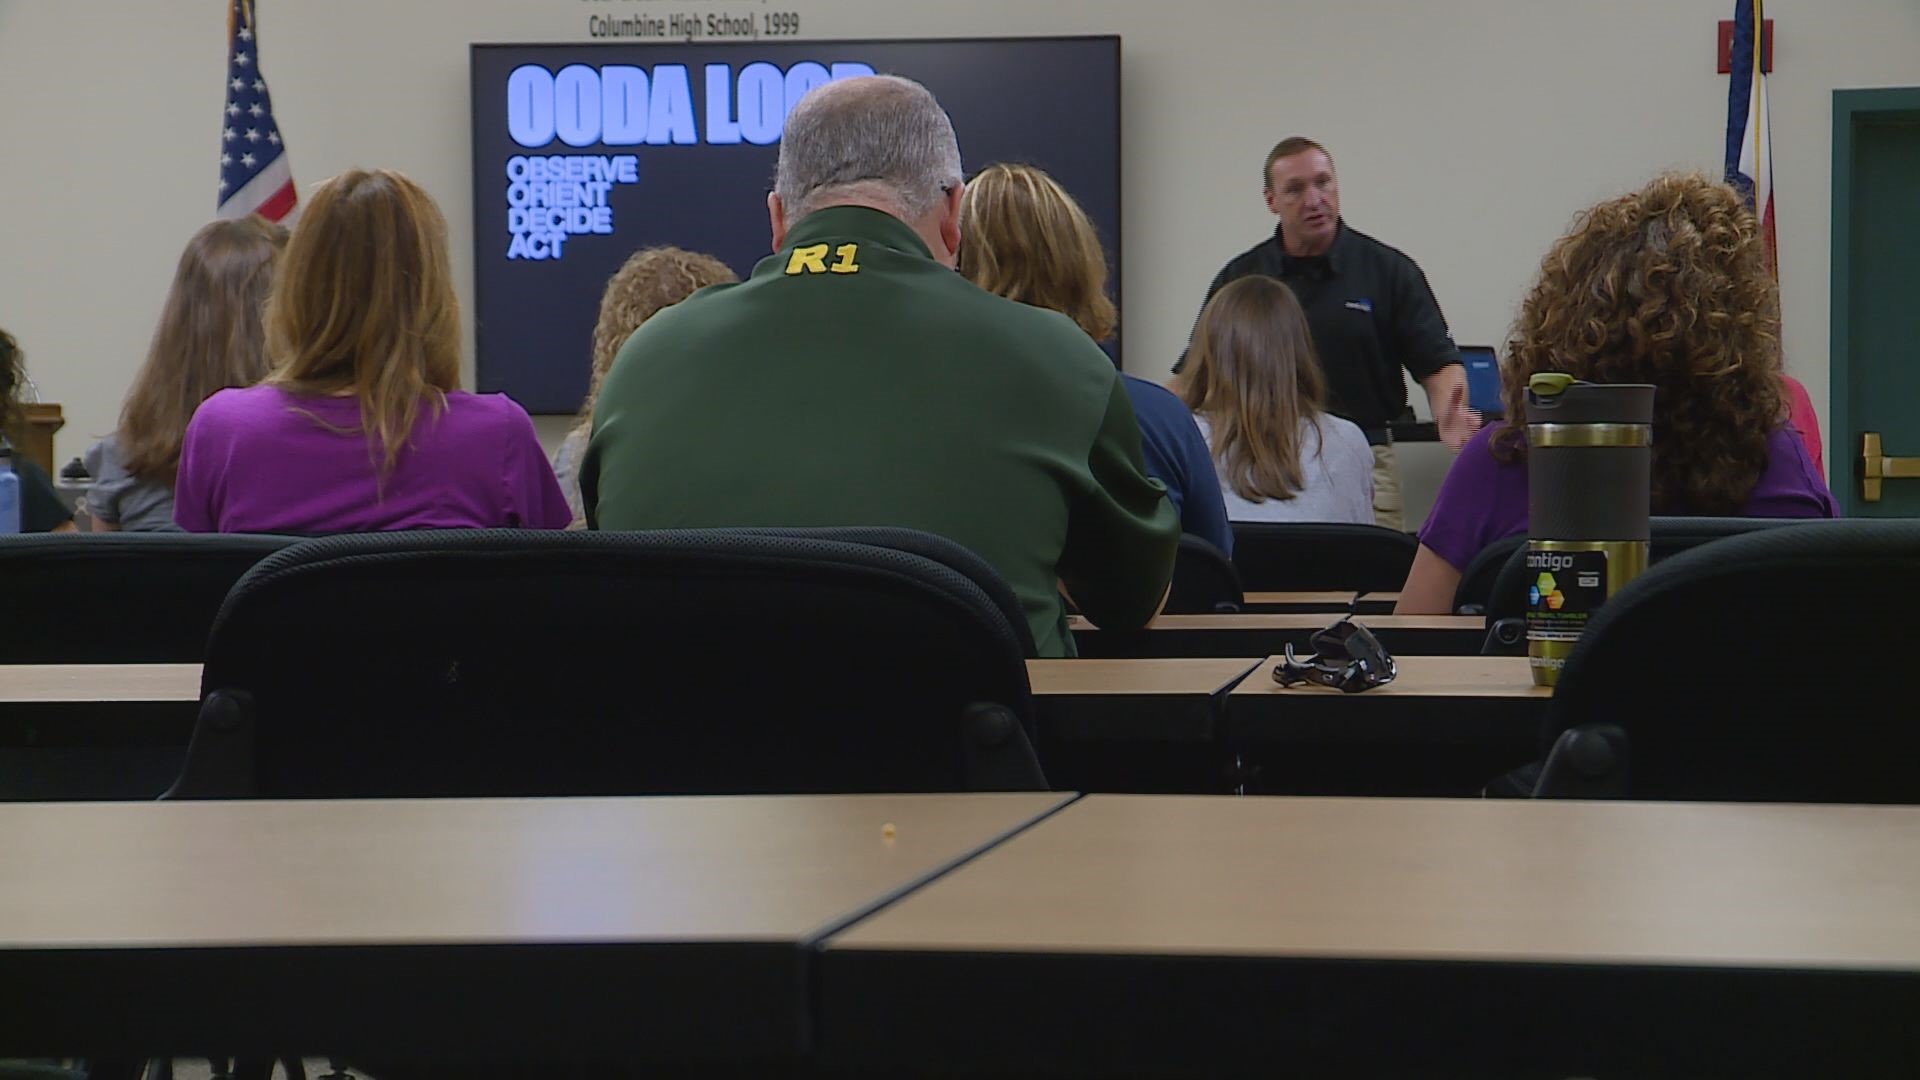 So far, about 30 nurses in schools across the district have gone through tactical training to be able to help law enforcement in an active shooter situation. Please be aware that some of the footage shown in this video may be disturbing to some viewers.